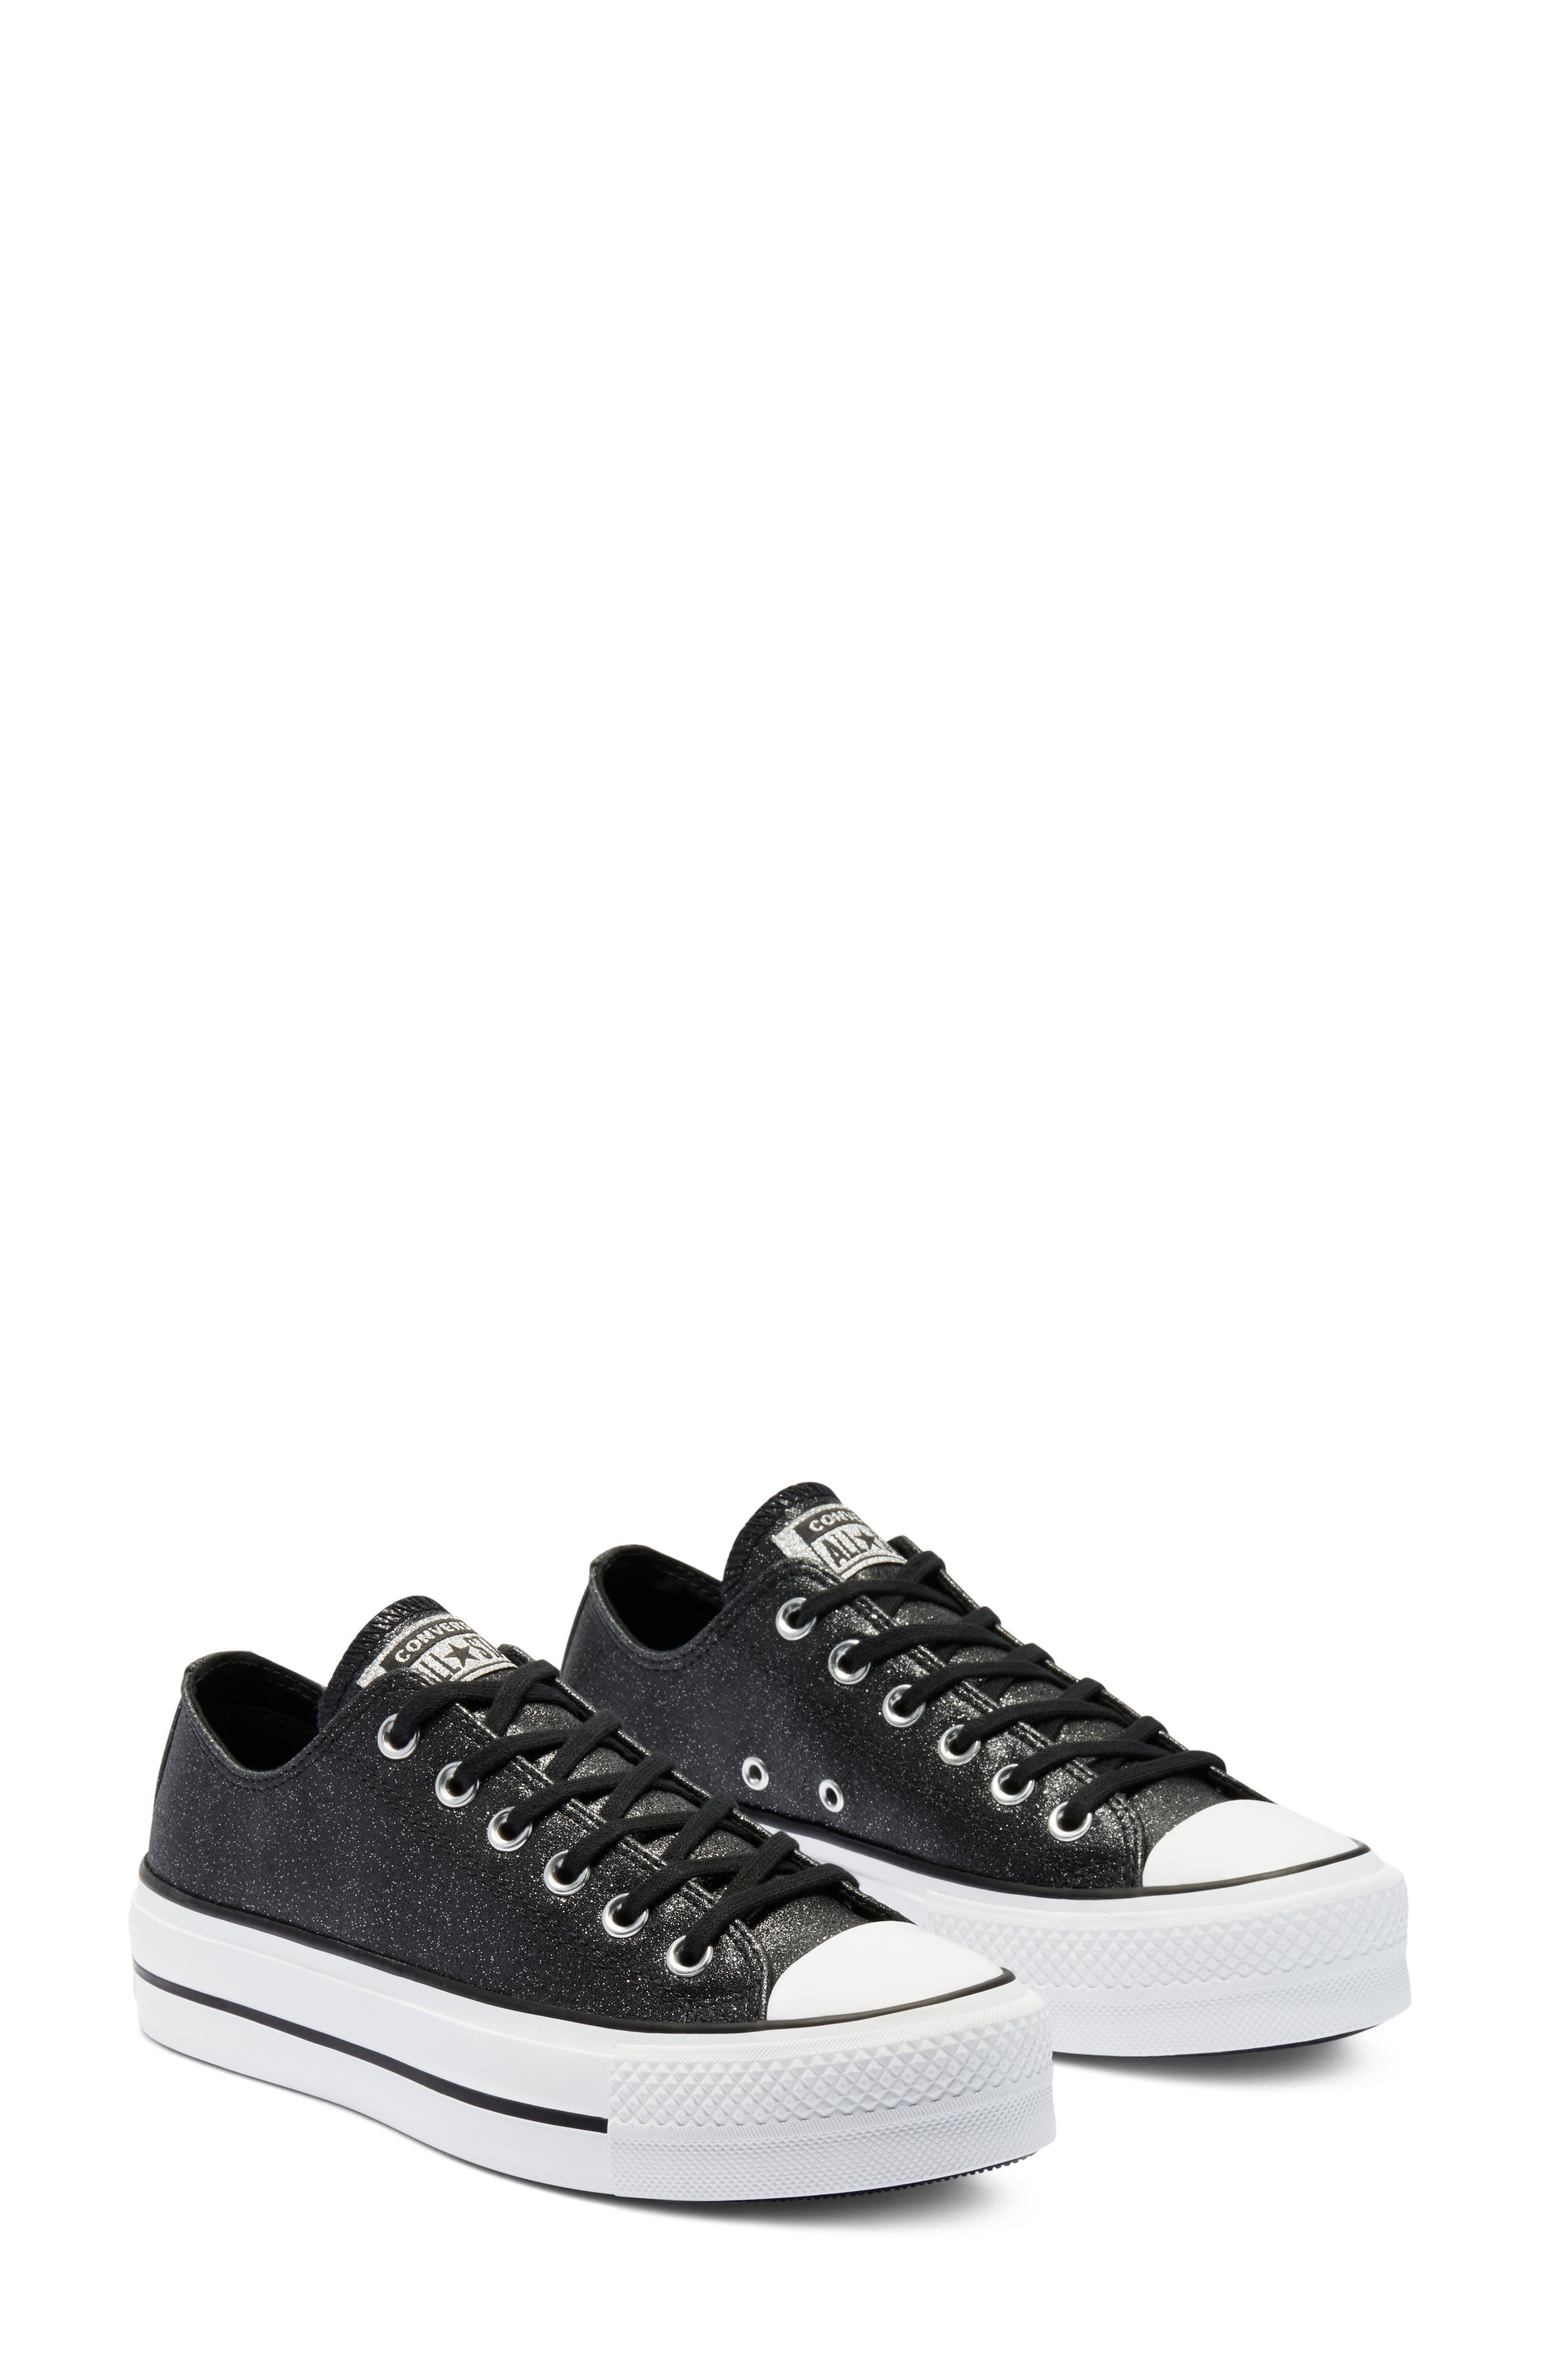 nordstrom converse womens